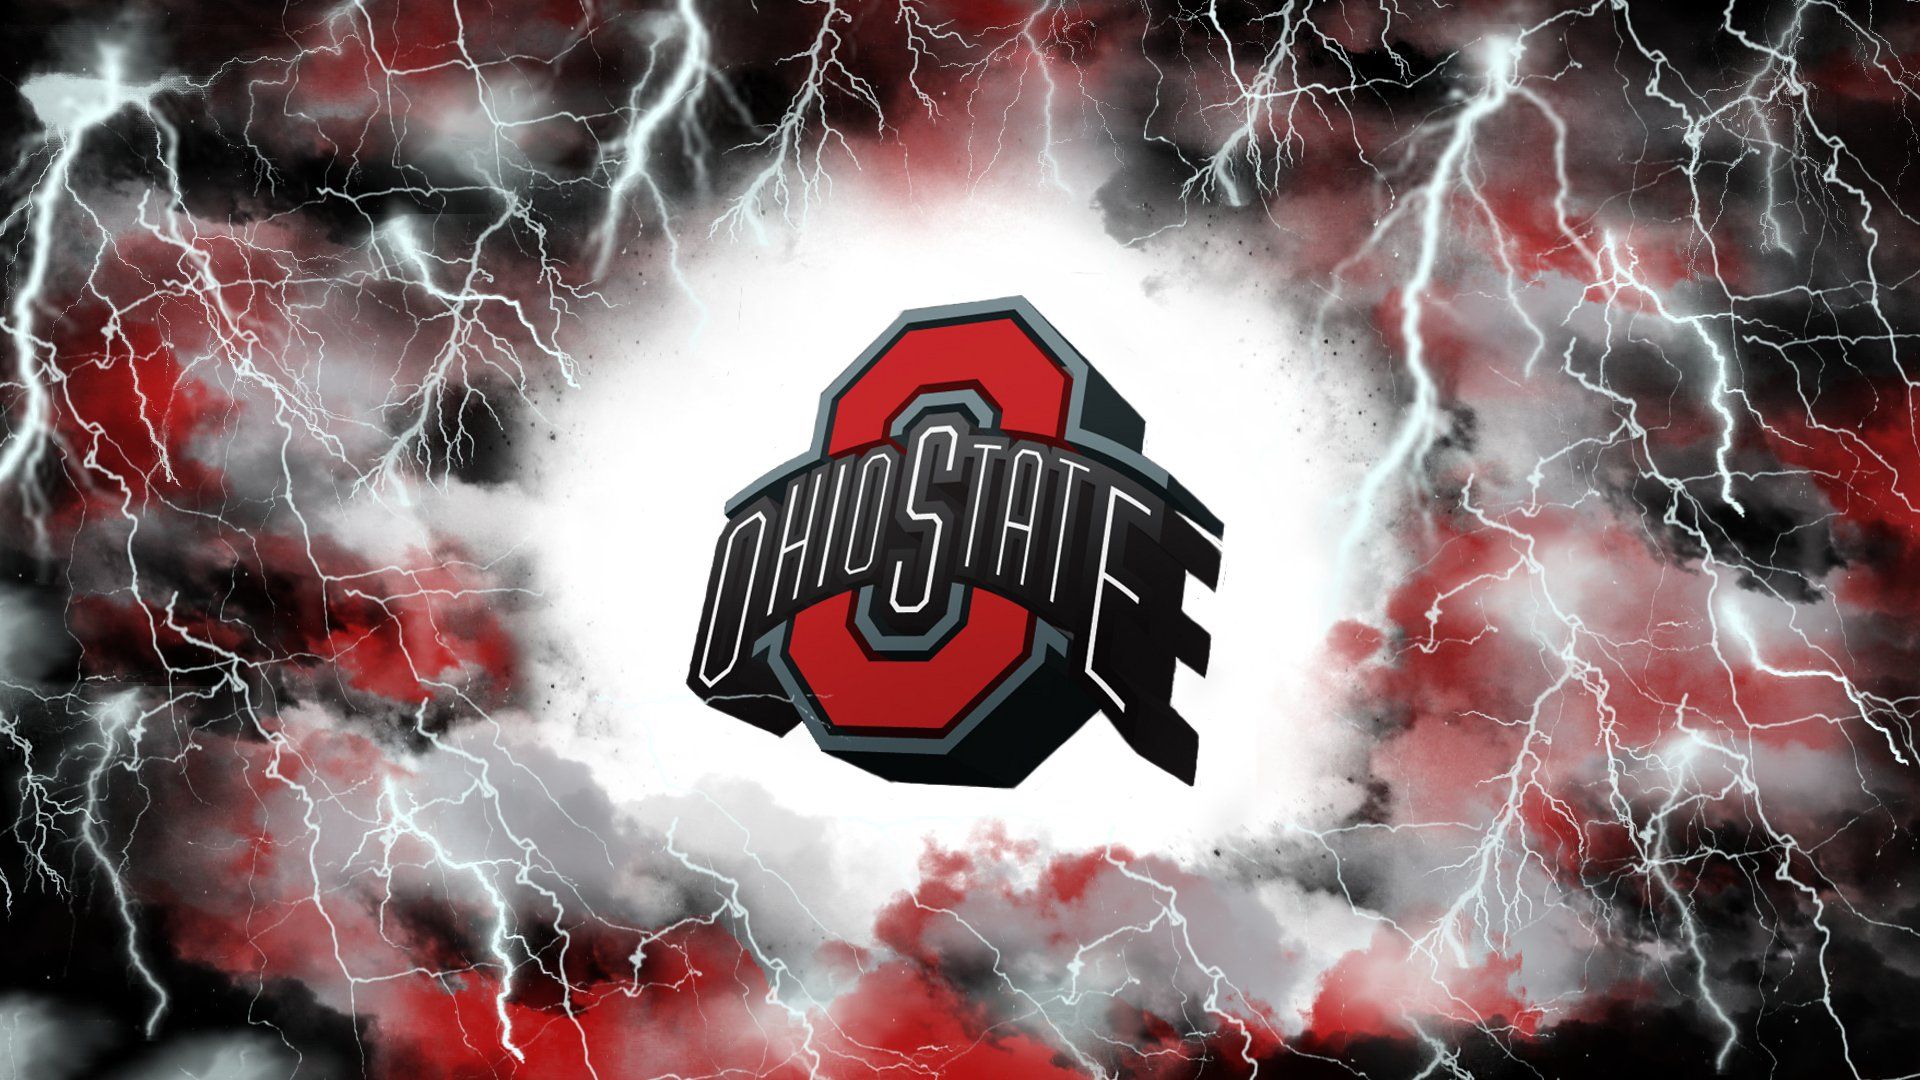 Osu Wallpaper Ideas For The House Ohio State Football